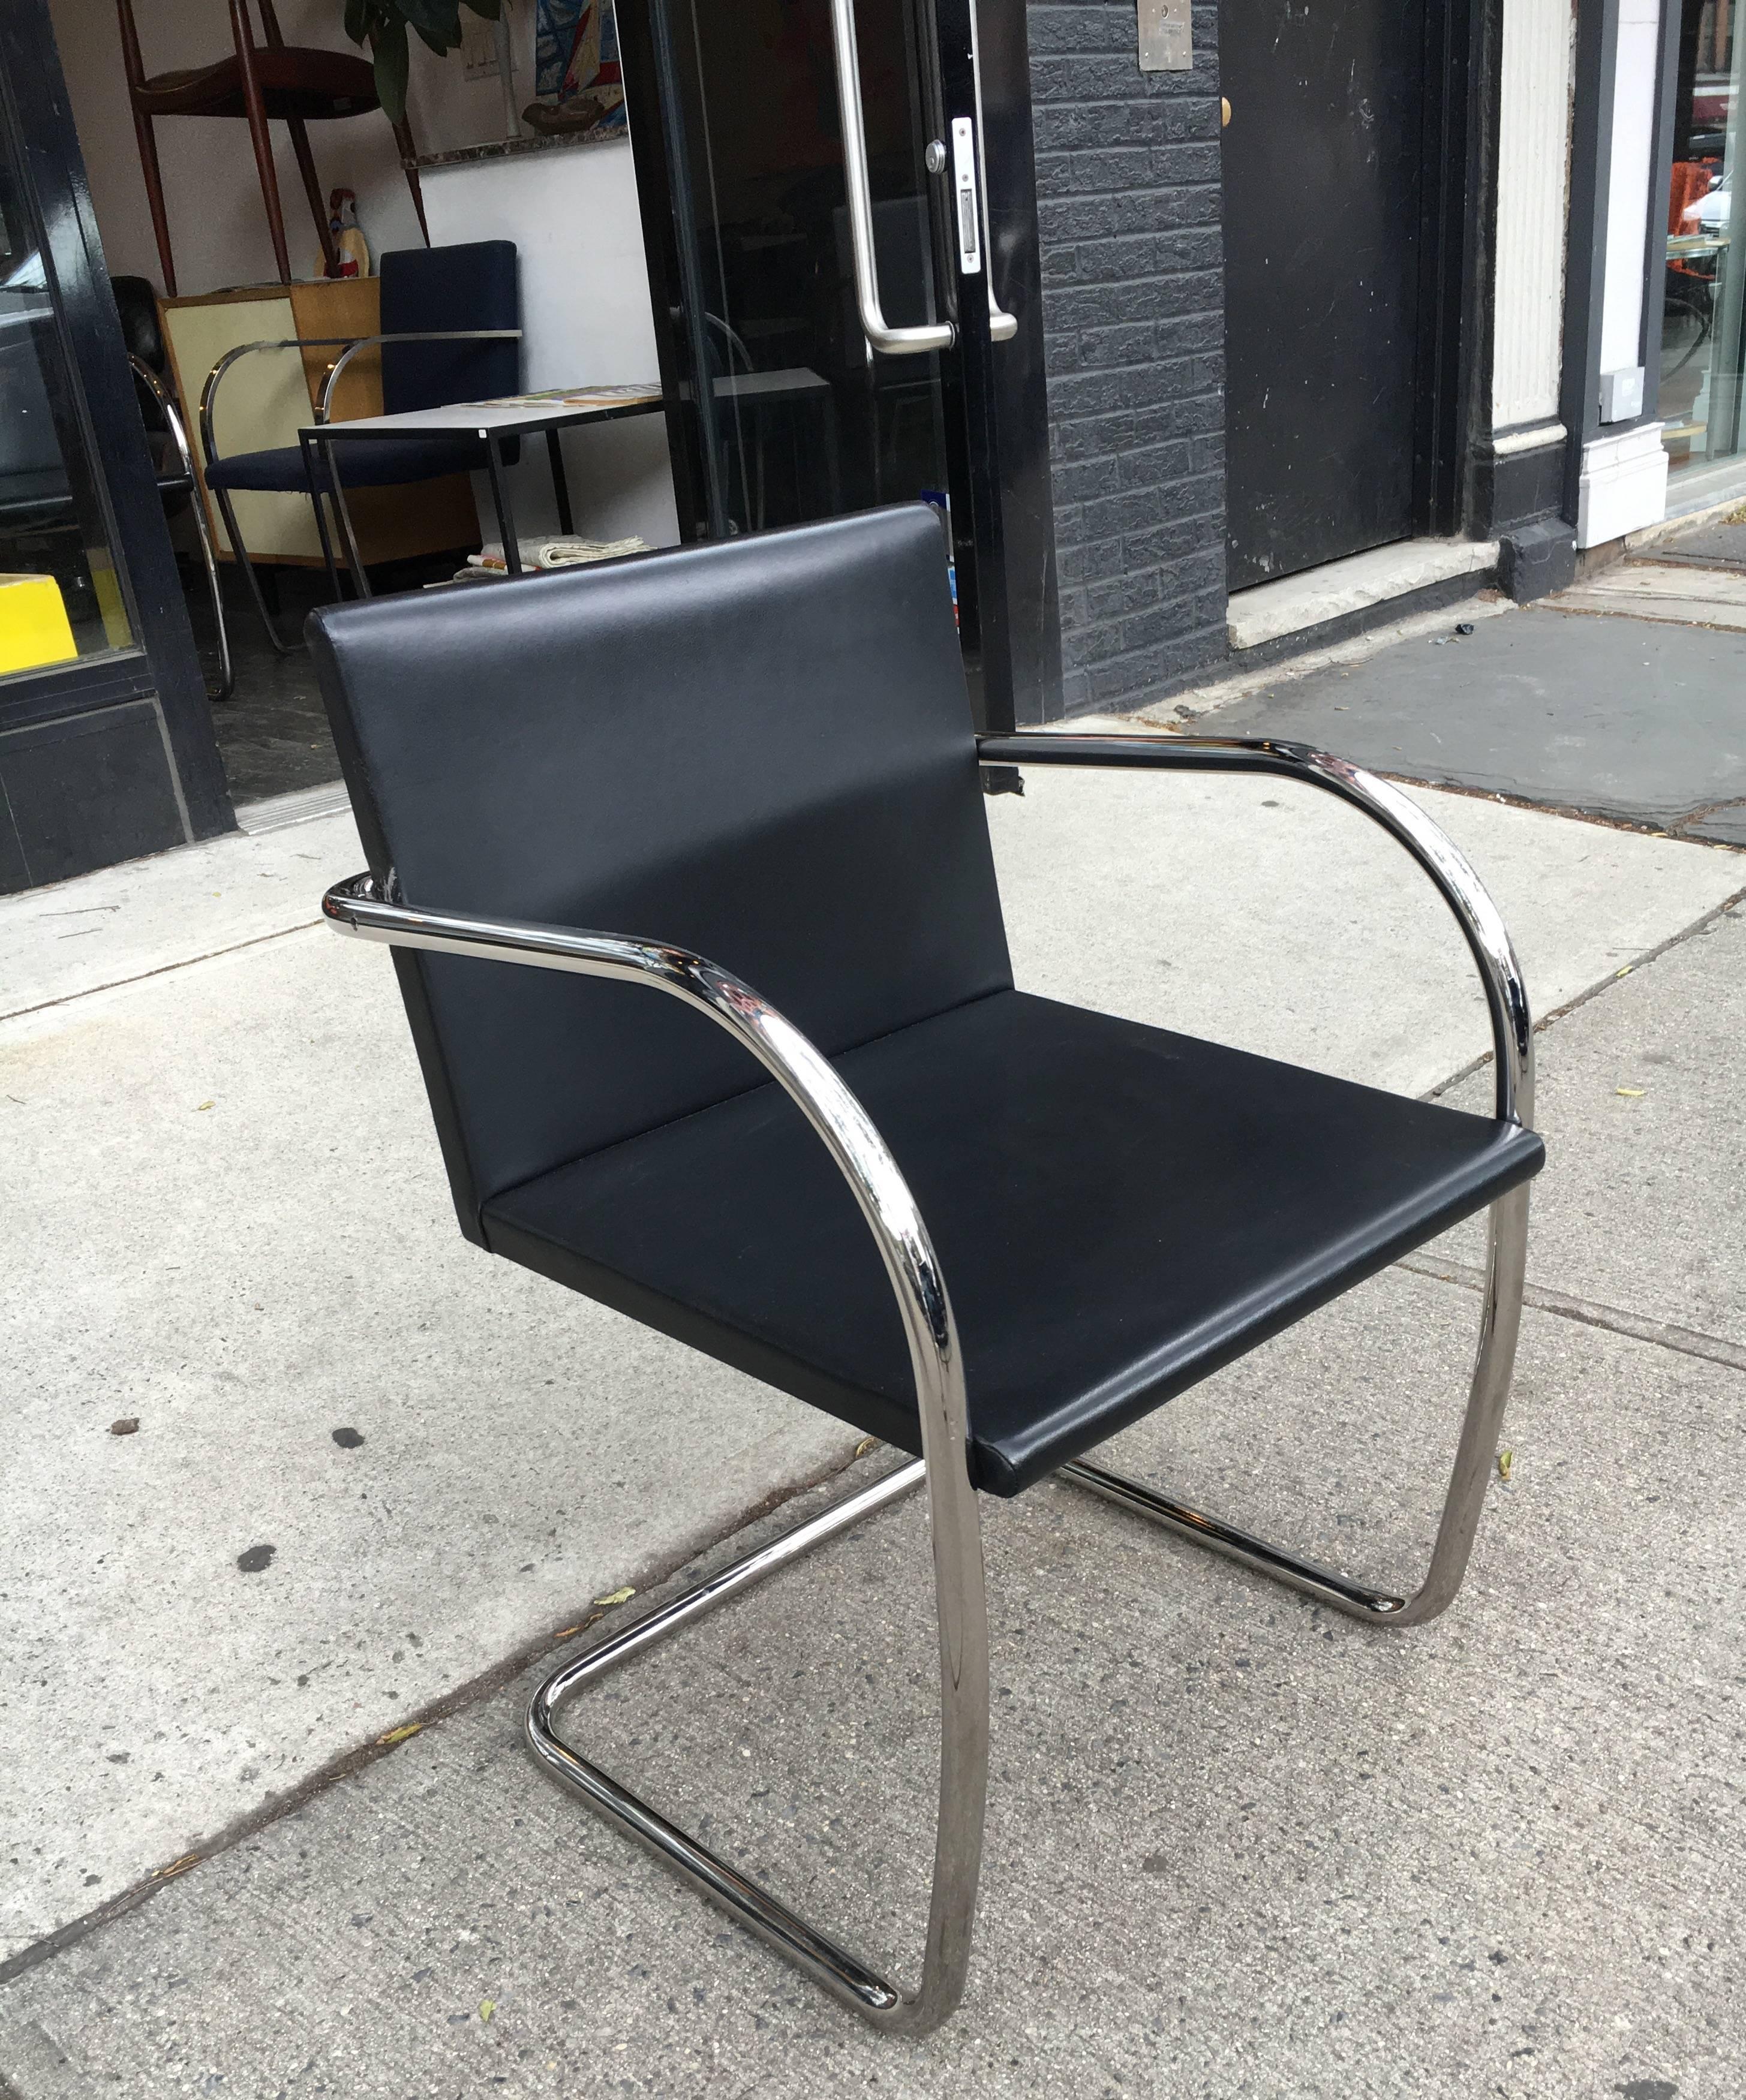 Set of four tubular Brno chairs by Mies van der Rohe for Knoll, black vinyl upholstery, excellent condition.